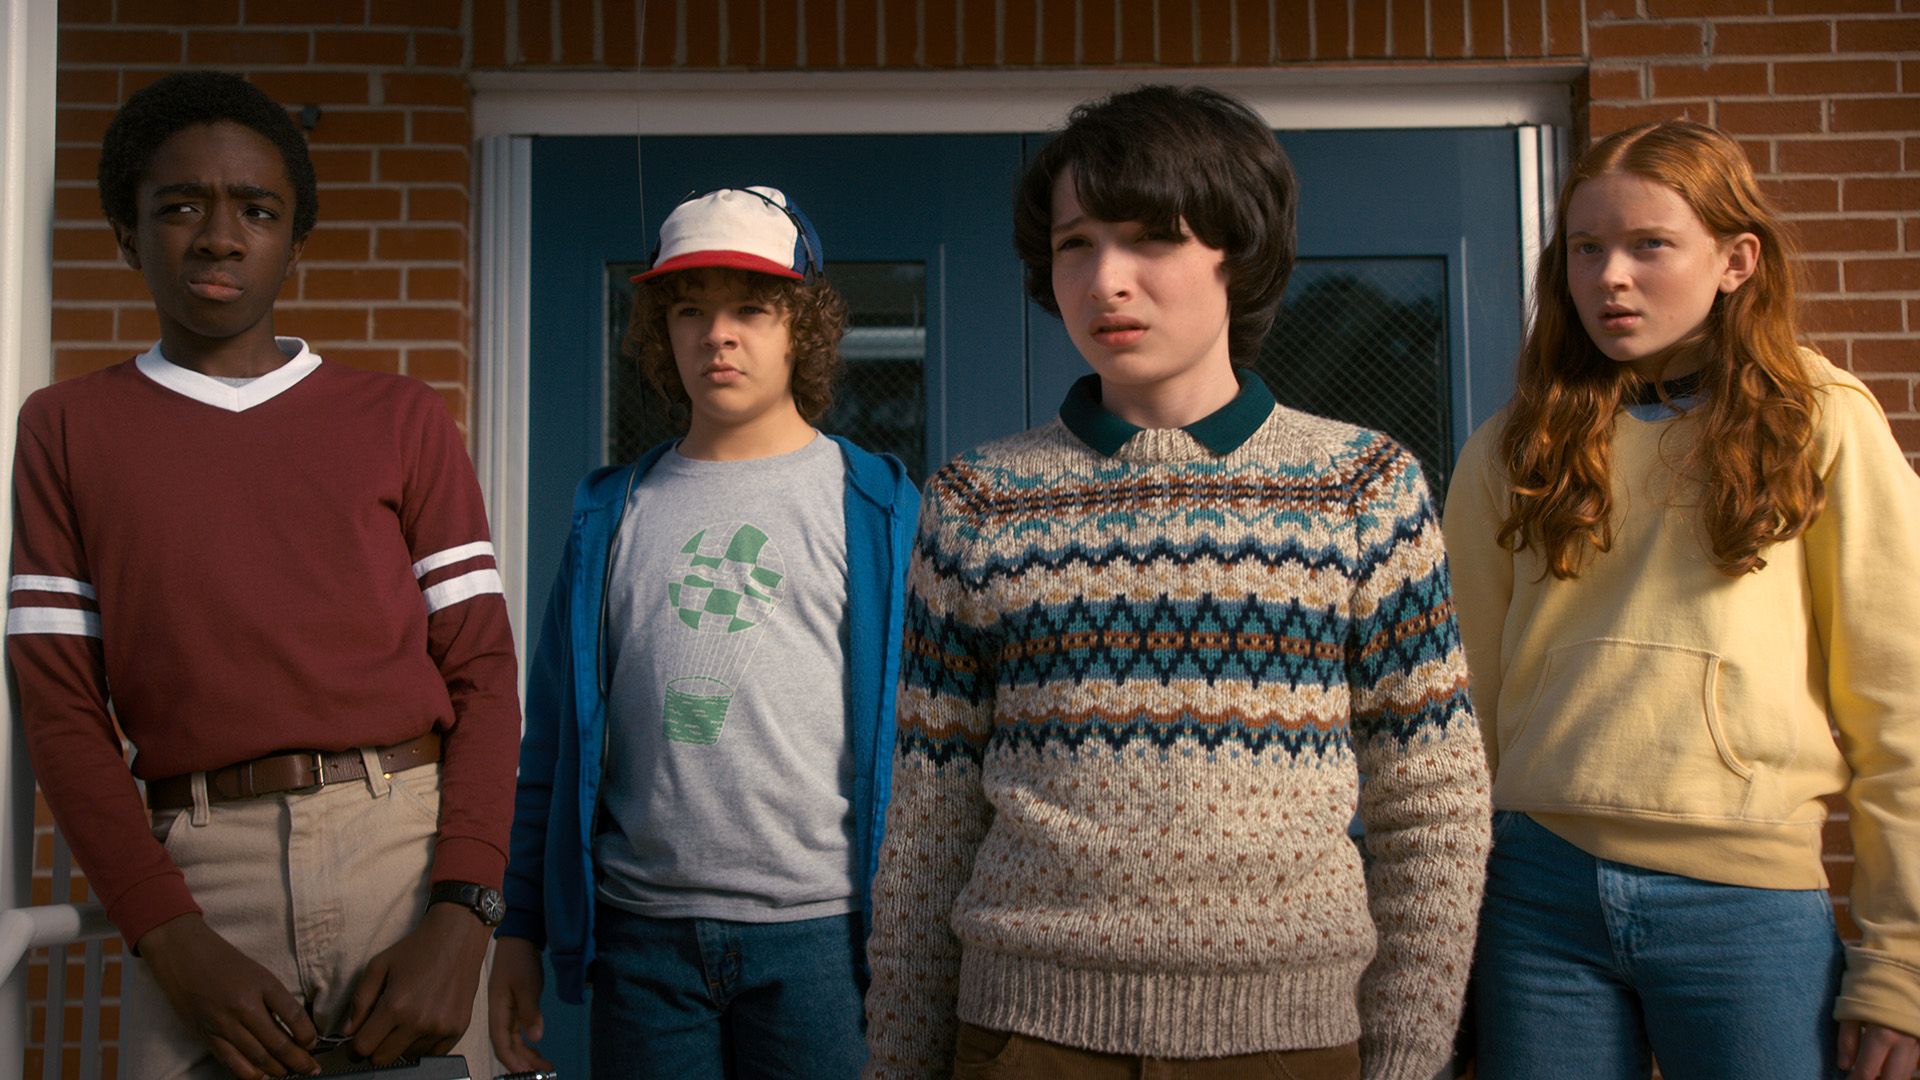 15 Shows Like 'Stranger Things' - What to Watch After Stranger Things